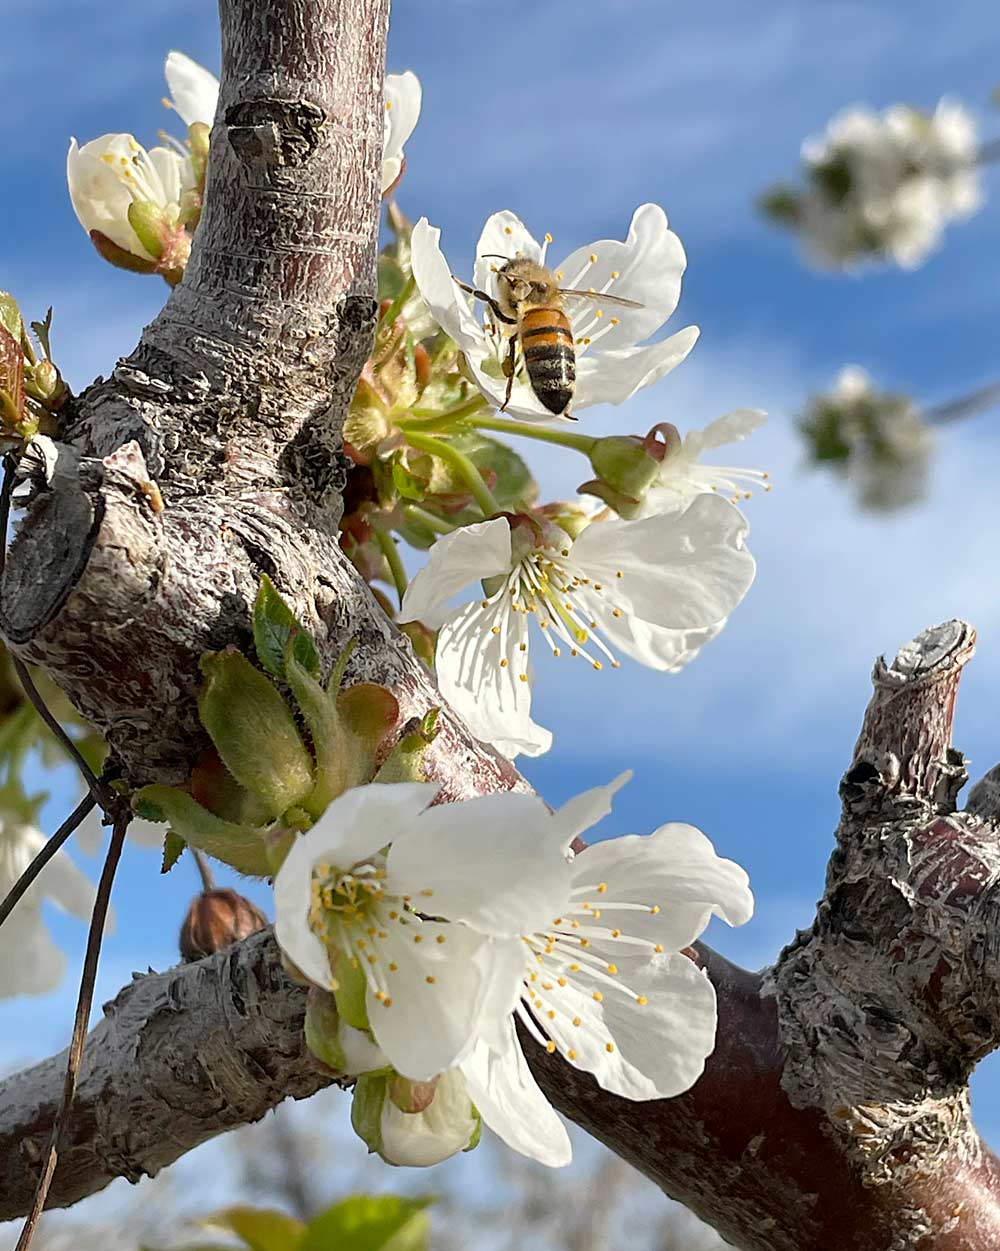 Pollination relies on bee activity, which is influenced by weather conditions, but wind or high temperatures can dry out the pollen. (Courtesy Jennifer Wiggs)